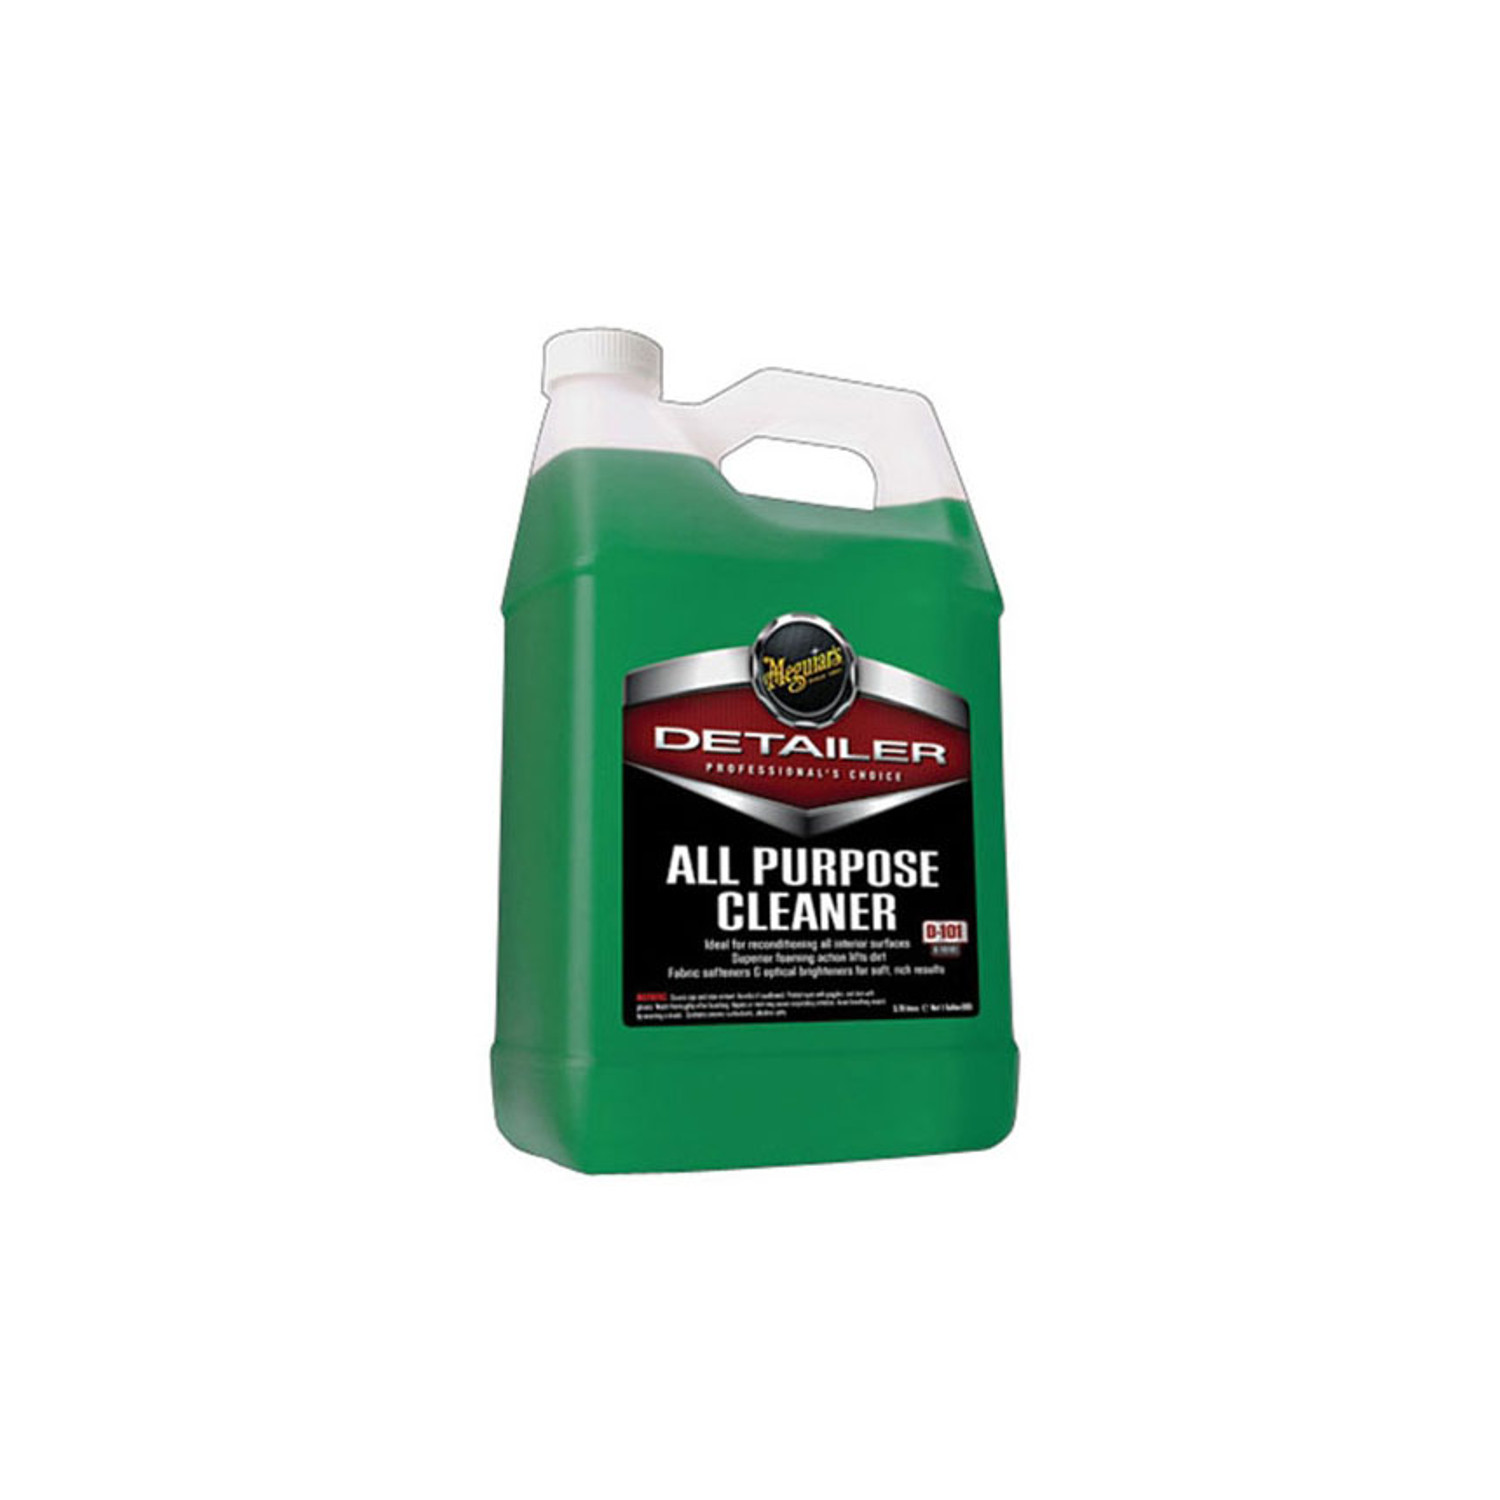 Meguiar's Detailing Interior Surface All Purpose Cleaner, 1 Gallon (2 Pack)